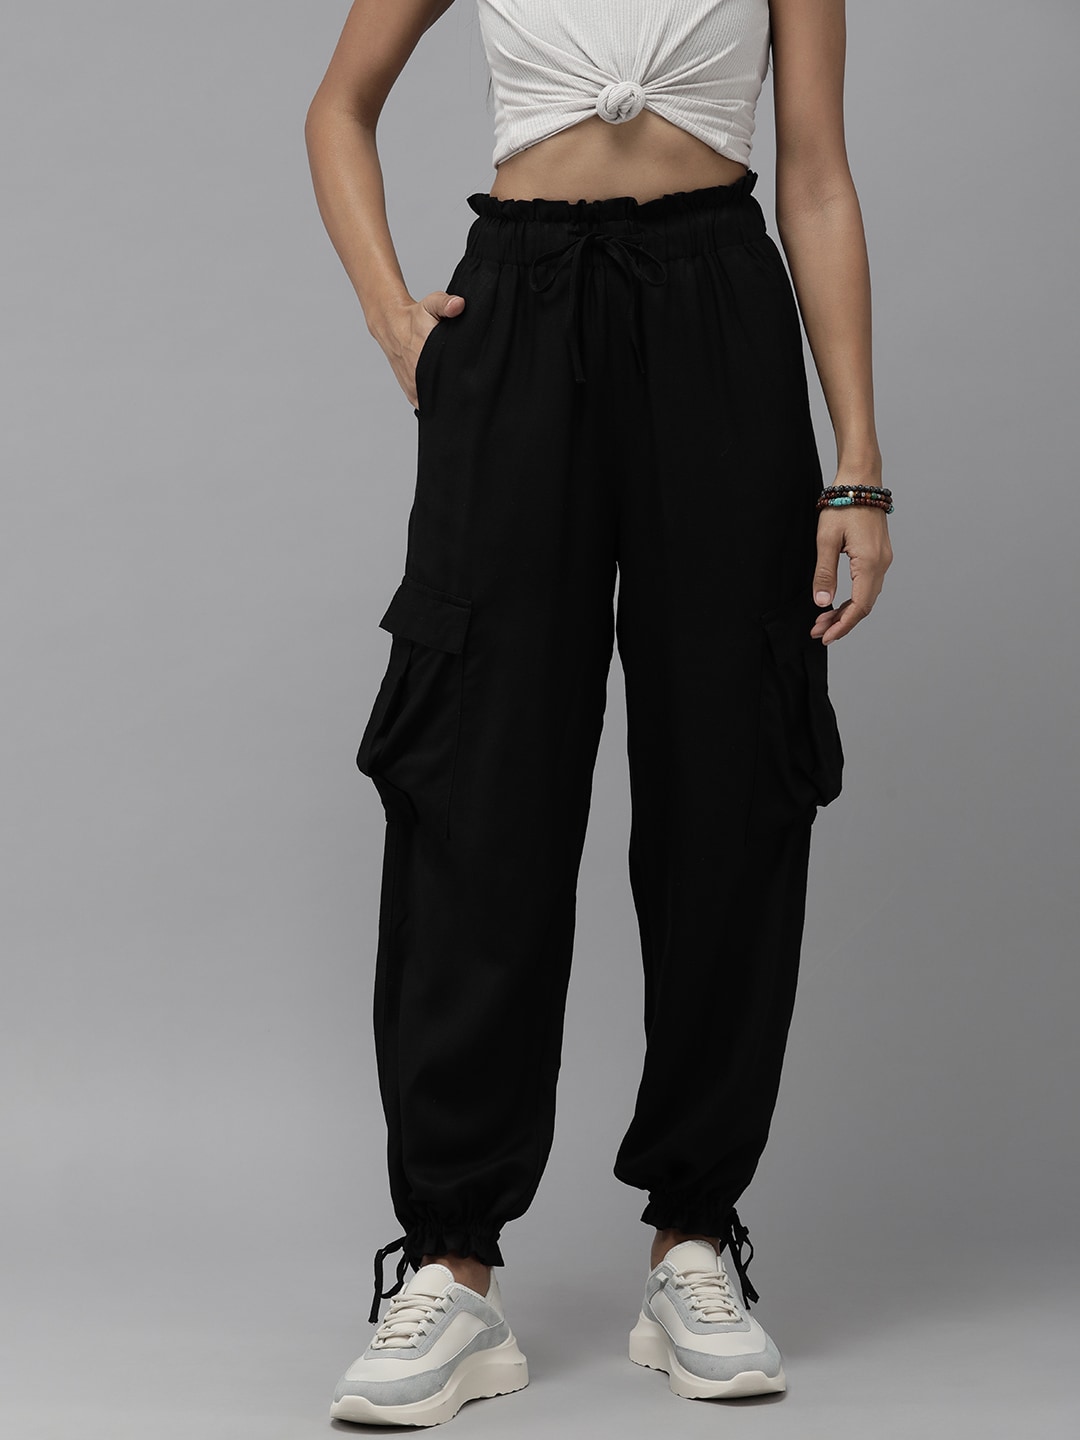 The Roadster Lifestyle Co. Women Black Solid Pleated Joggers Price in India